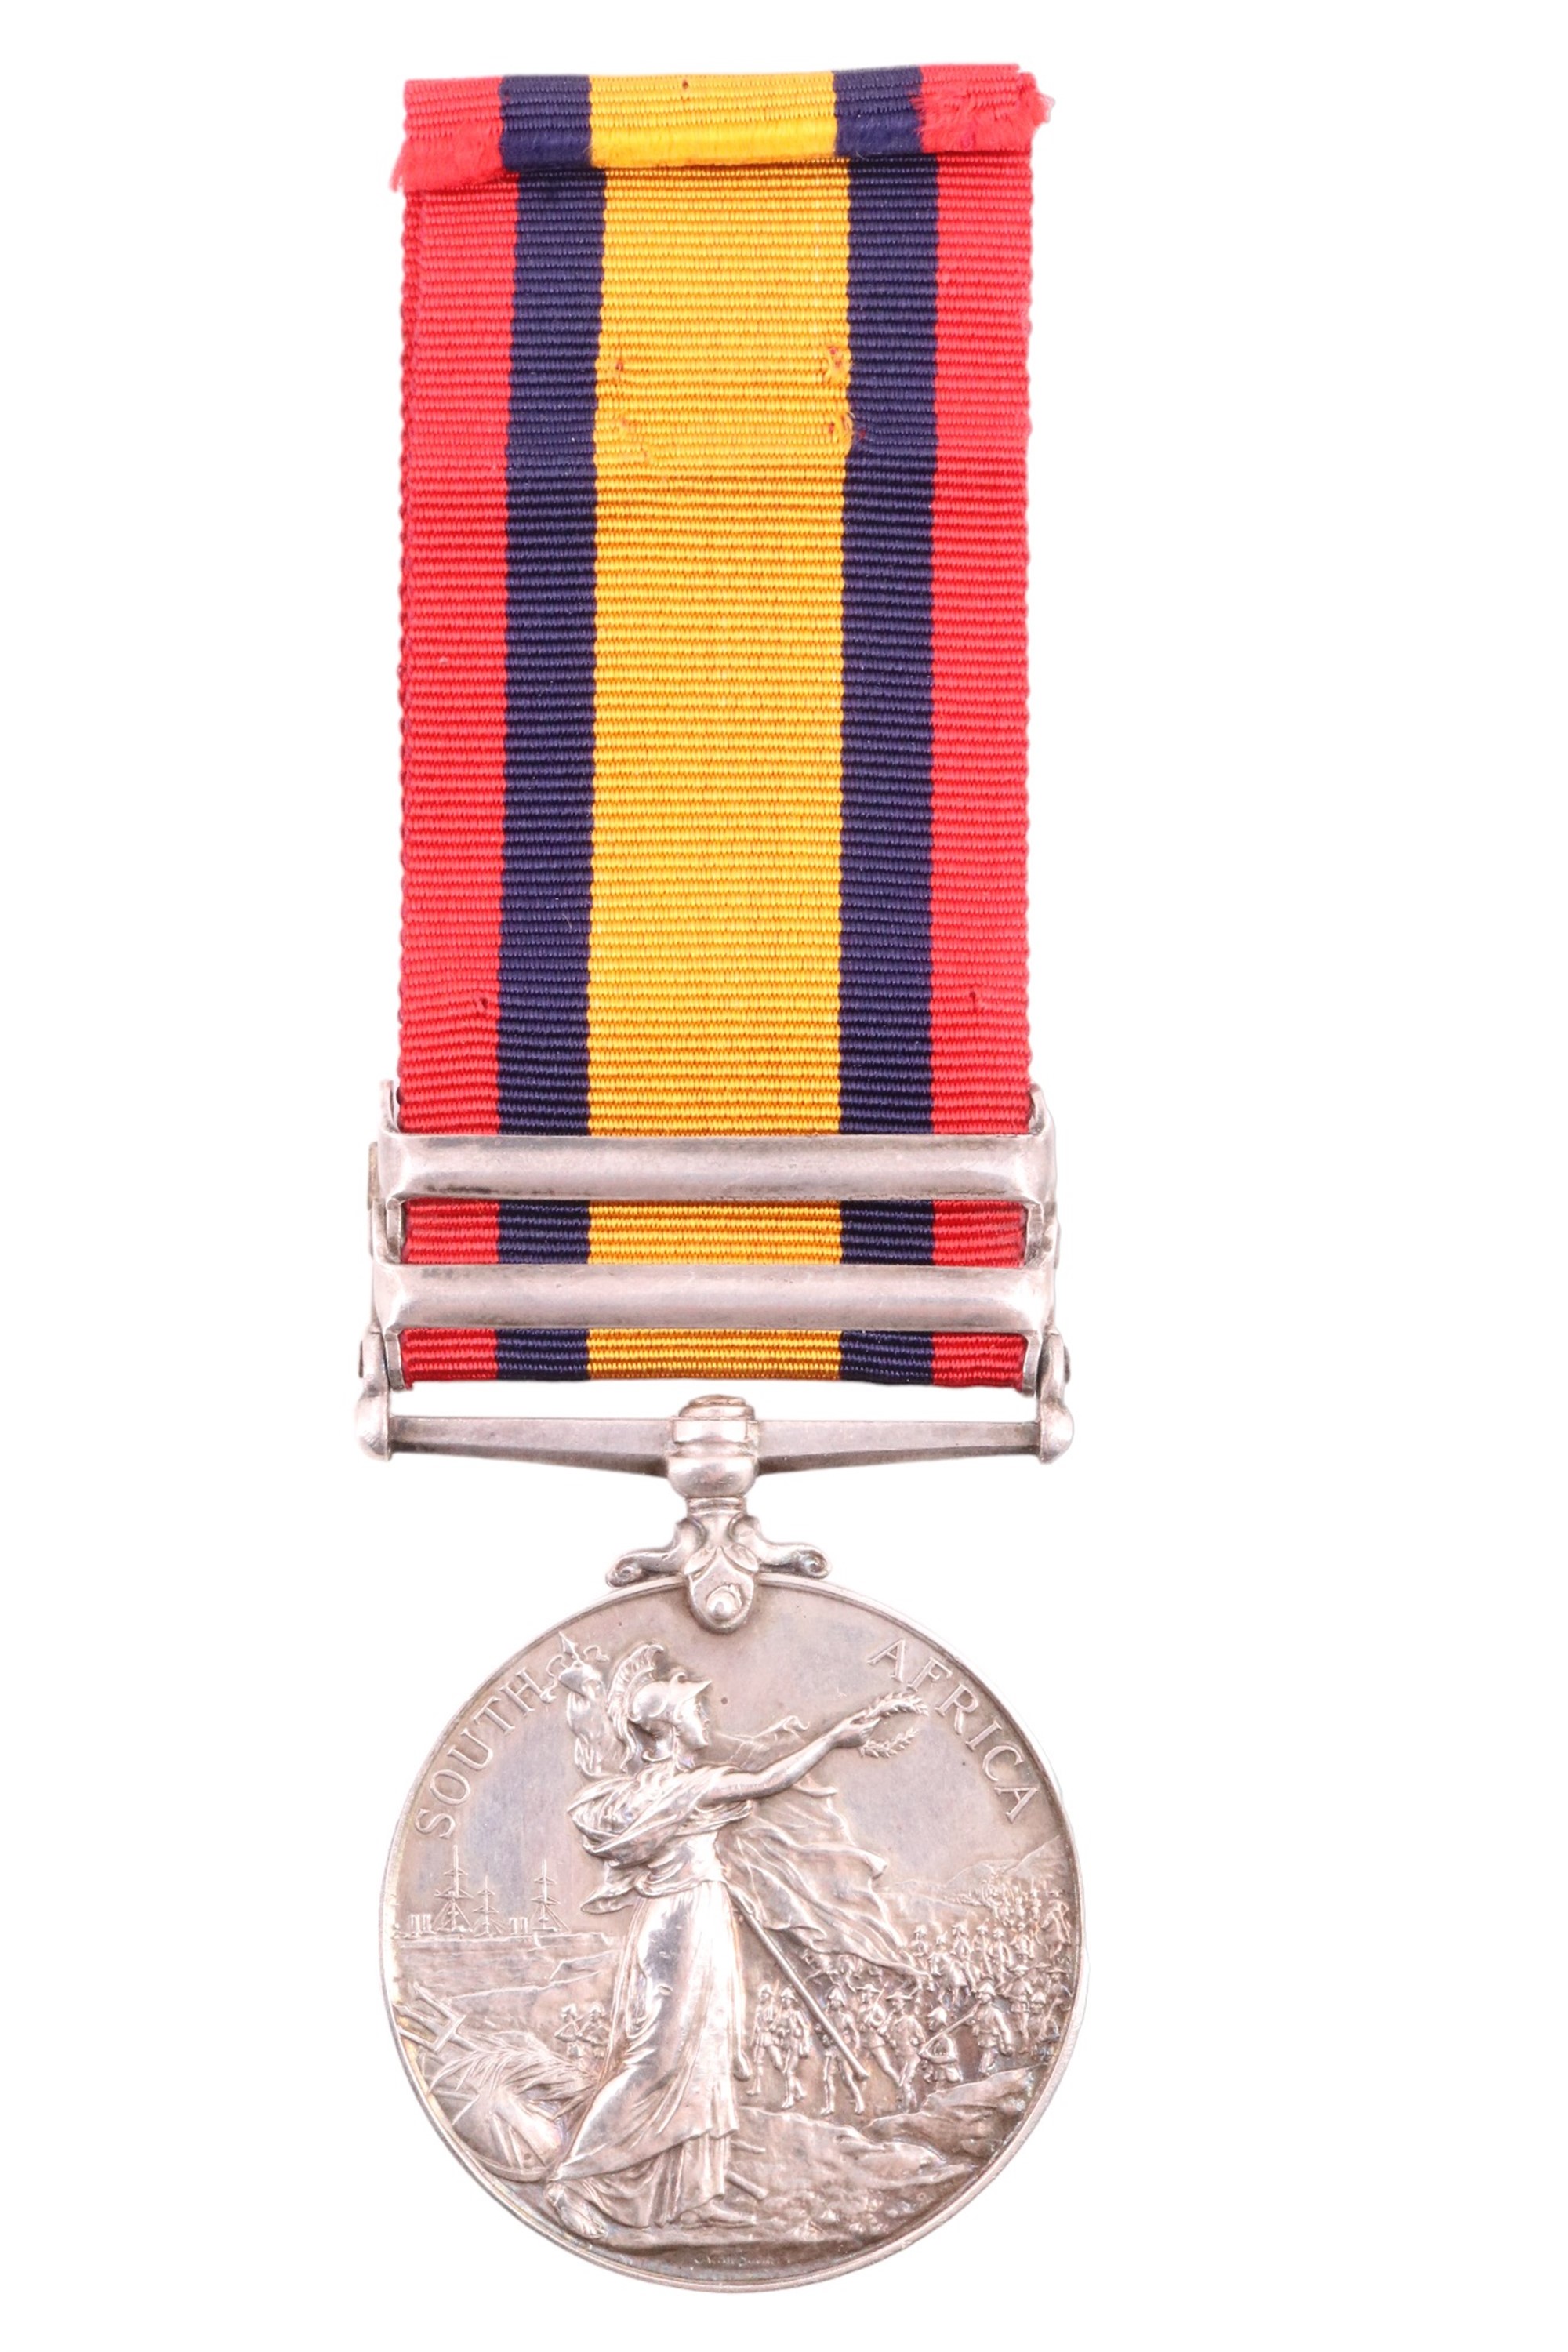 A Queen's South Africa Medal with two clasps to 6233 Pte G Myatt, Rl Warwick Regt, with research - Image 2 of 7